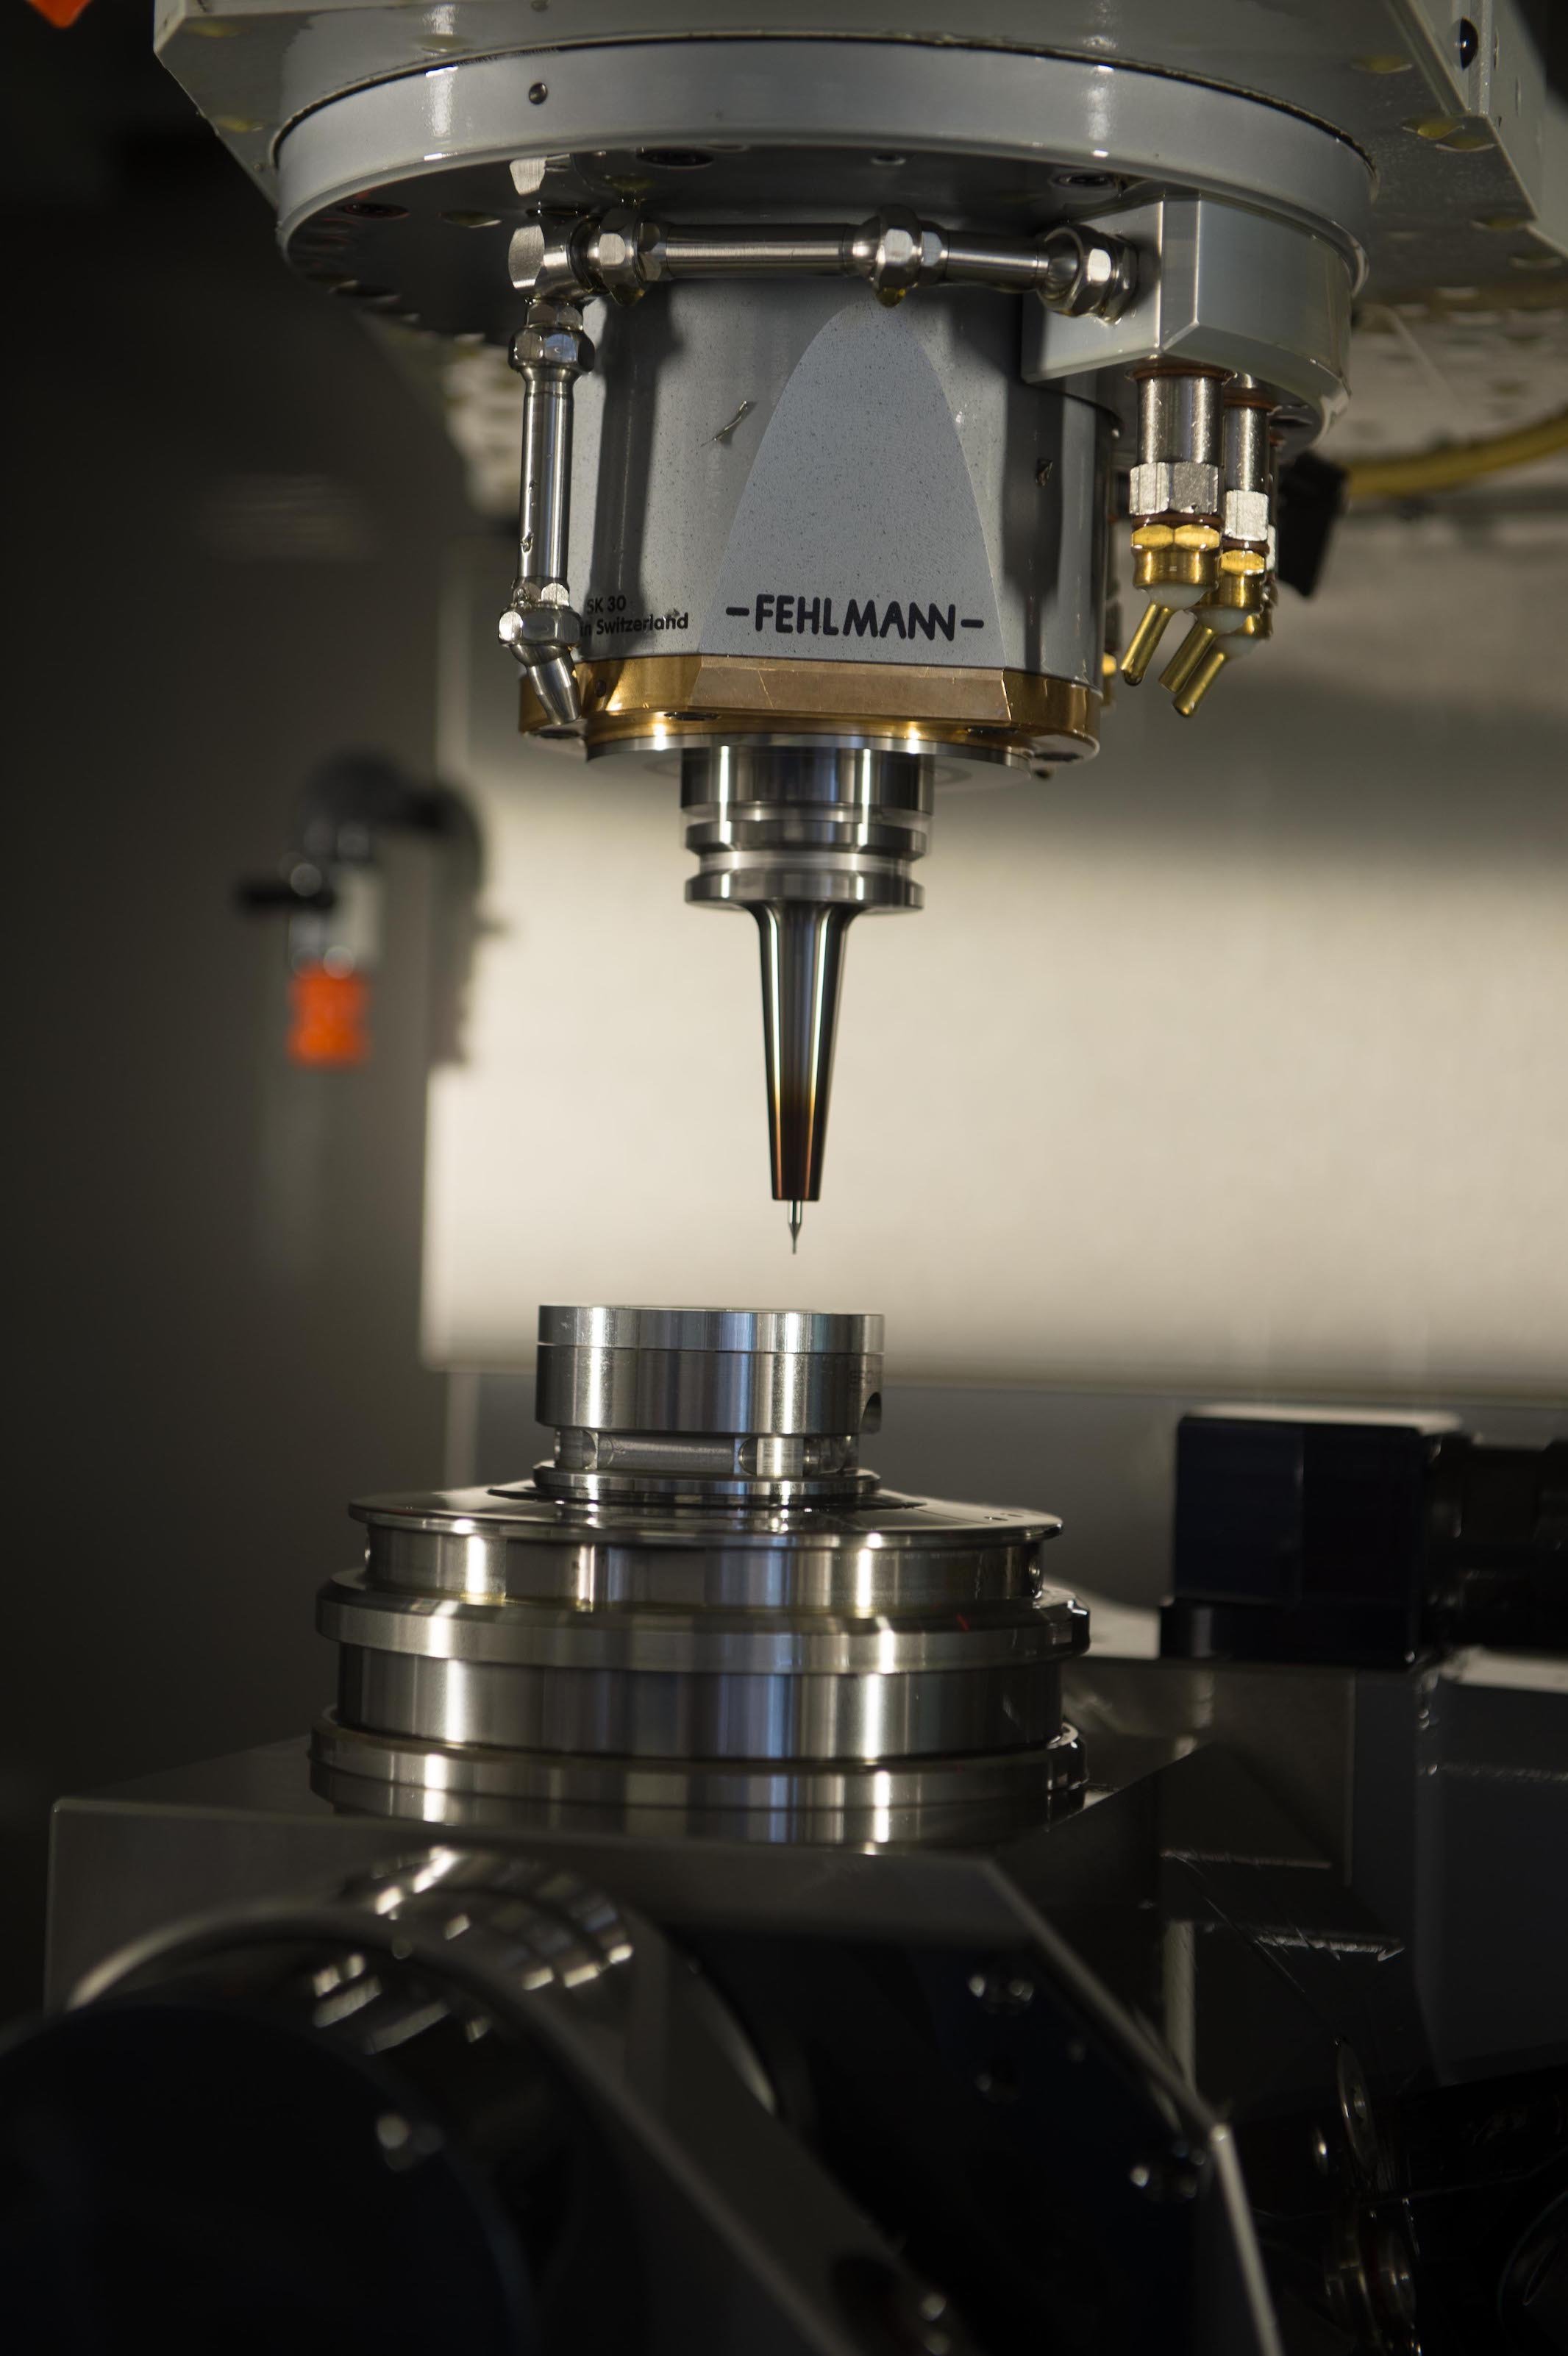 The production of the parts for the perpetual calendar requires precision tools with a diameter of as little as 0.2mm.